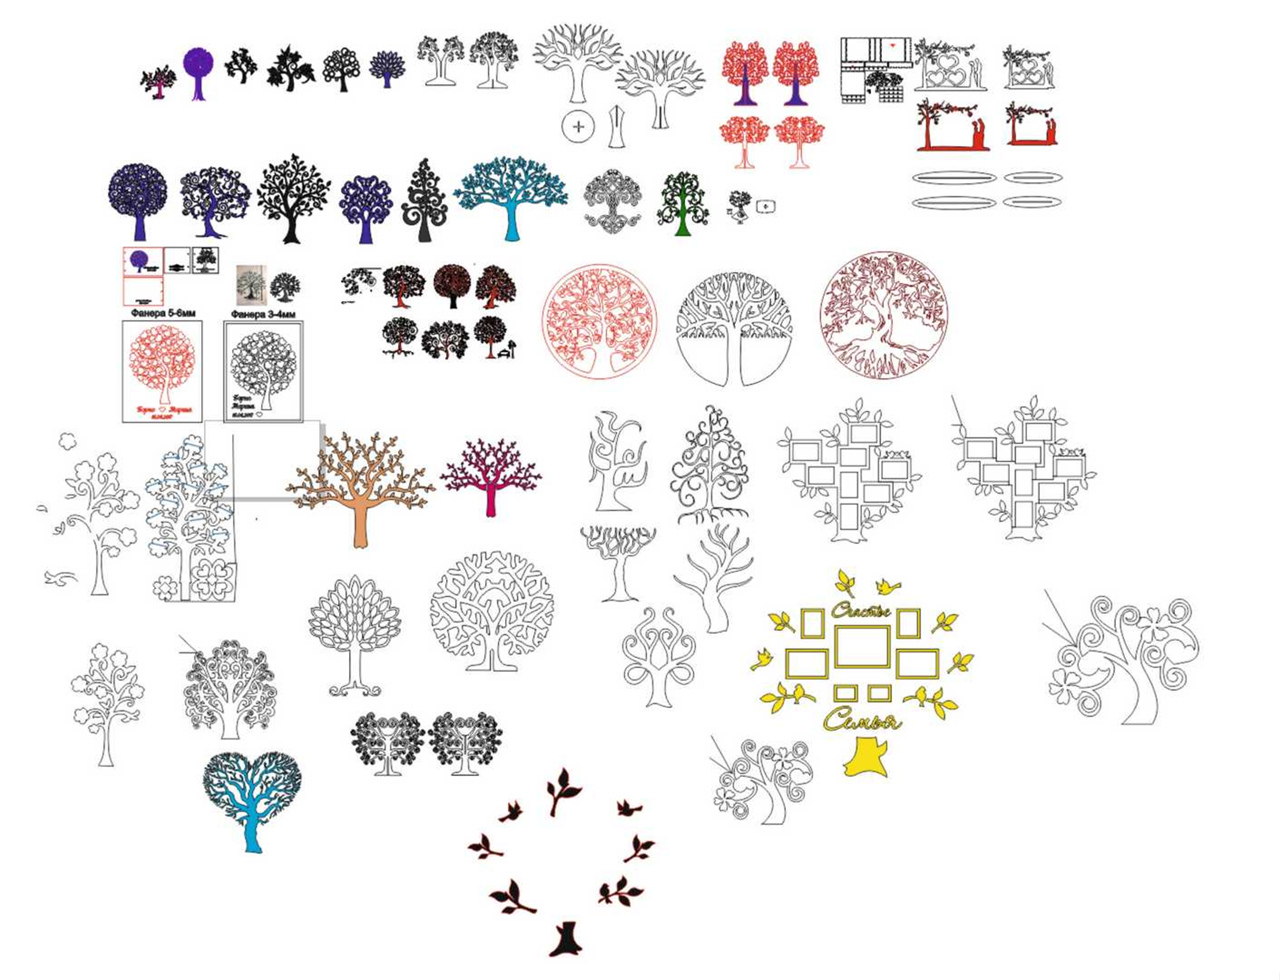 Laser Cut Tree Collection Layout Free CDR Vectors Art